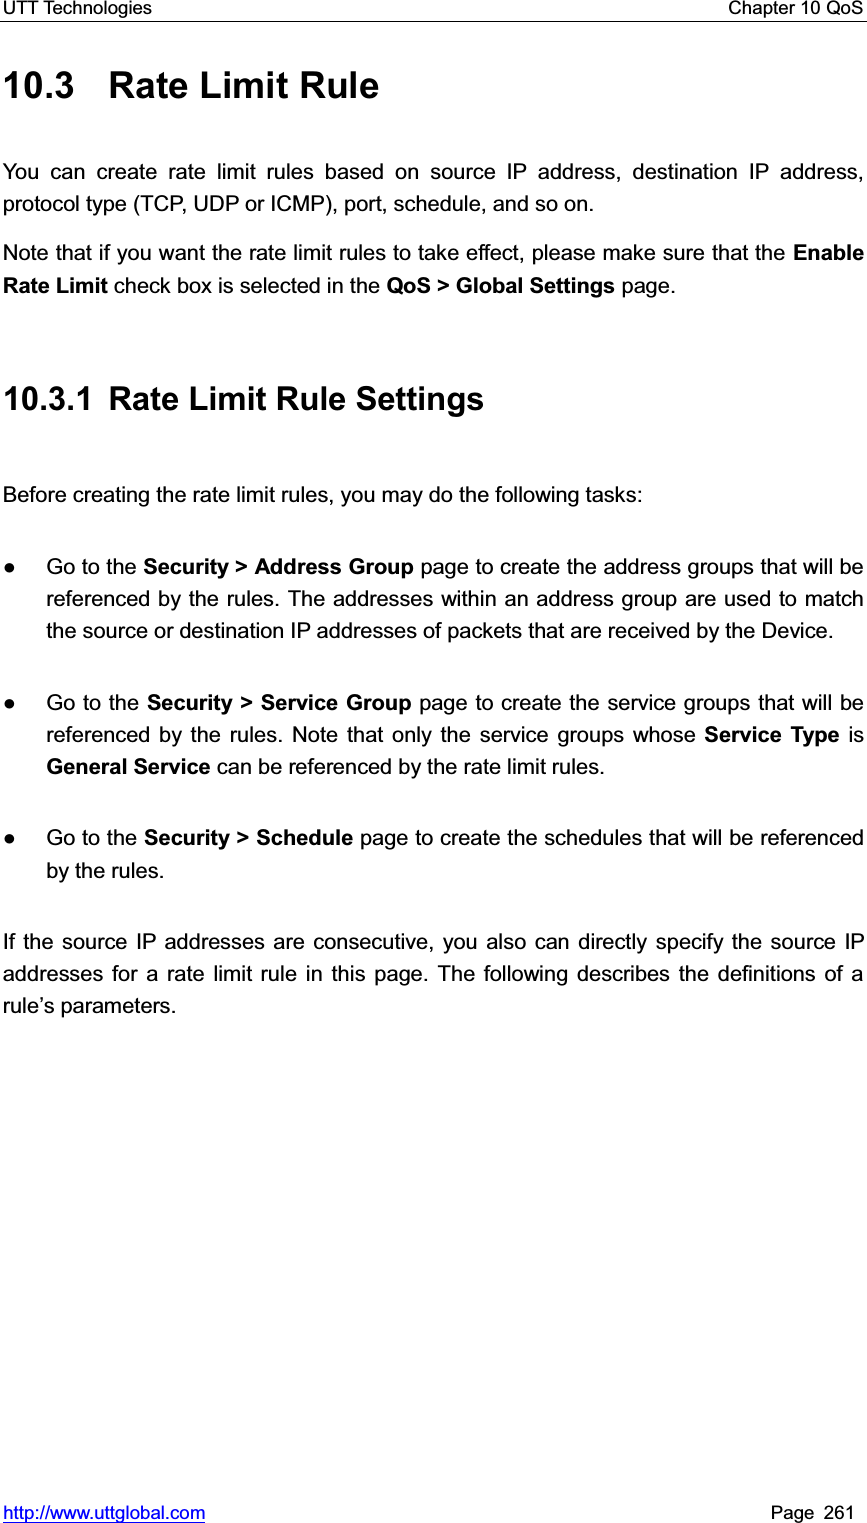 UTT Technologies    Chapter 10 QoS   http://www.uttglobal.com Page 261 10.3  Rate Limit Rule You can create rate limit rules based on source IP address, destination IP address, protocol type (TCP, UDP or ICMP), port, schedule, and so on.   Note that if you want the rate limit rules to take effect, please make sure that the Enable Rate Limit check box is selected in the QoS &gt; Global Settings page. 10.3.1  Rate Limit Rule Settings Before creating the rate limit rules, you may do the following tasks: Ɣ Go to the Security &gt; Address Group page to create the address groups that will be referenced by the rules. The addresses within an address group are used to match the source or destination IP addresses of packets that are received by the Device.   Ɣ Go to the Security &gt; Service Group page to create the service groups that will be referenced by the rules. Note that only the service groups whose Service Type is General Service can be referenced by the rate limit rules.Ɣ Go to the Security &gt; Schedule page to create the schedules that will be referenced by the rules. If the source IP addresses are consecutive, you also can directly specify the source IP addresses for a rate limit rule in this page. The following describes the definitions of a rule¶s parameters. 